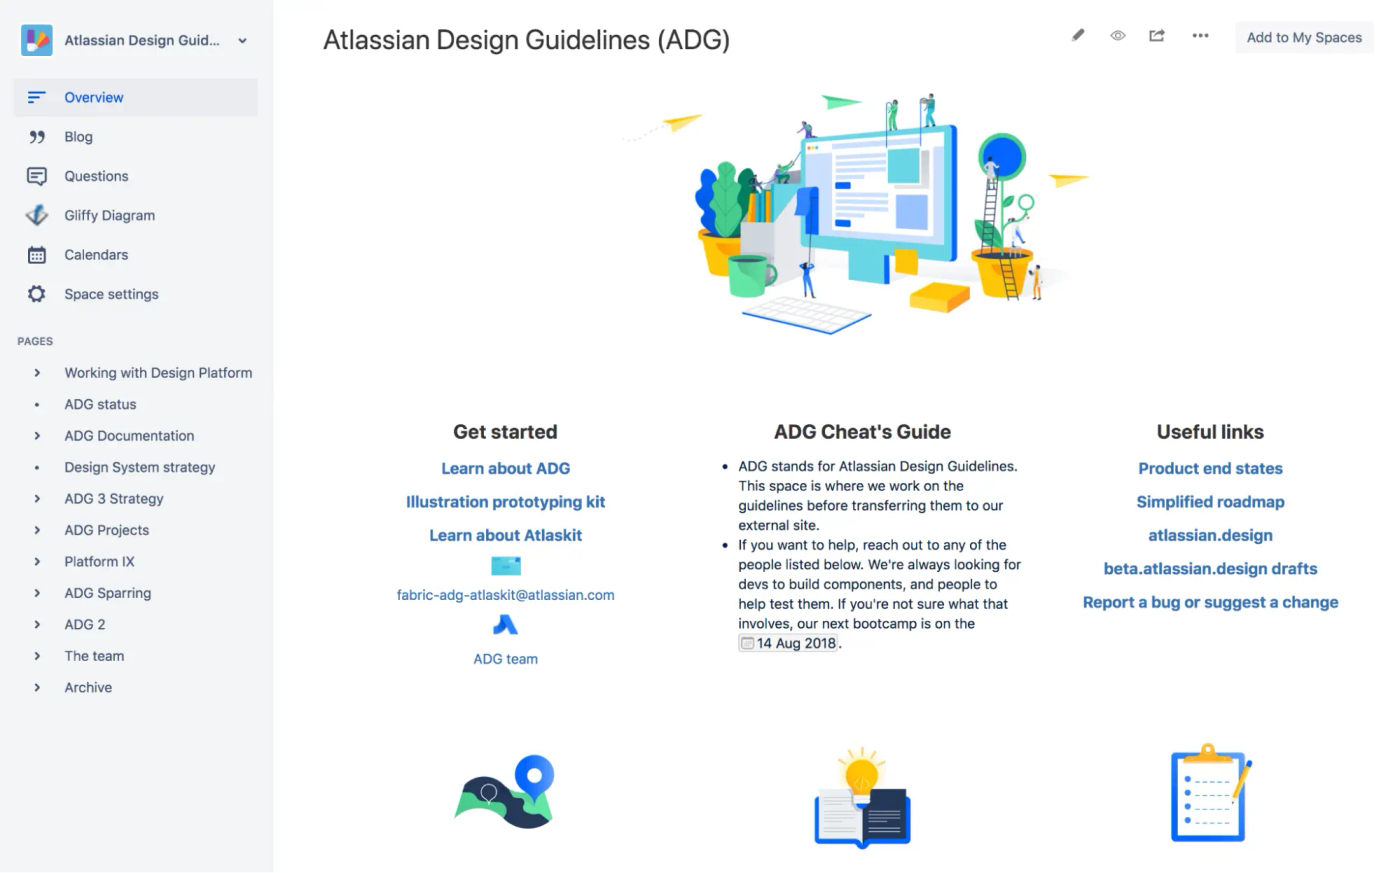 A Confluence Cloud page showing Atlassian Design Guidelines (ADG)